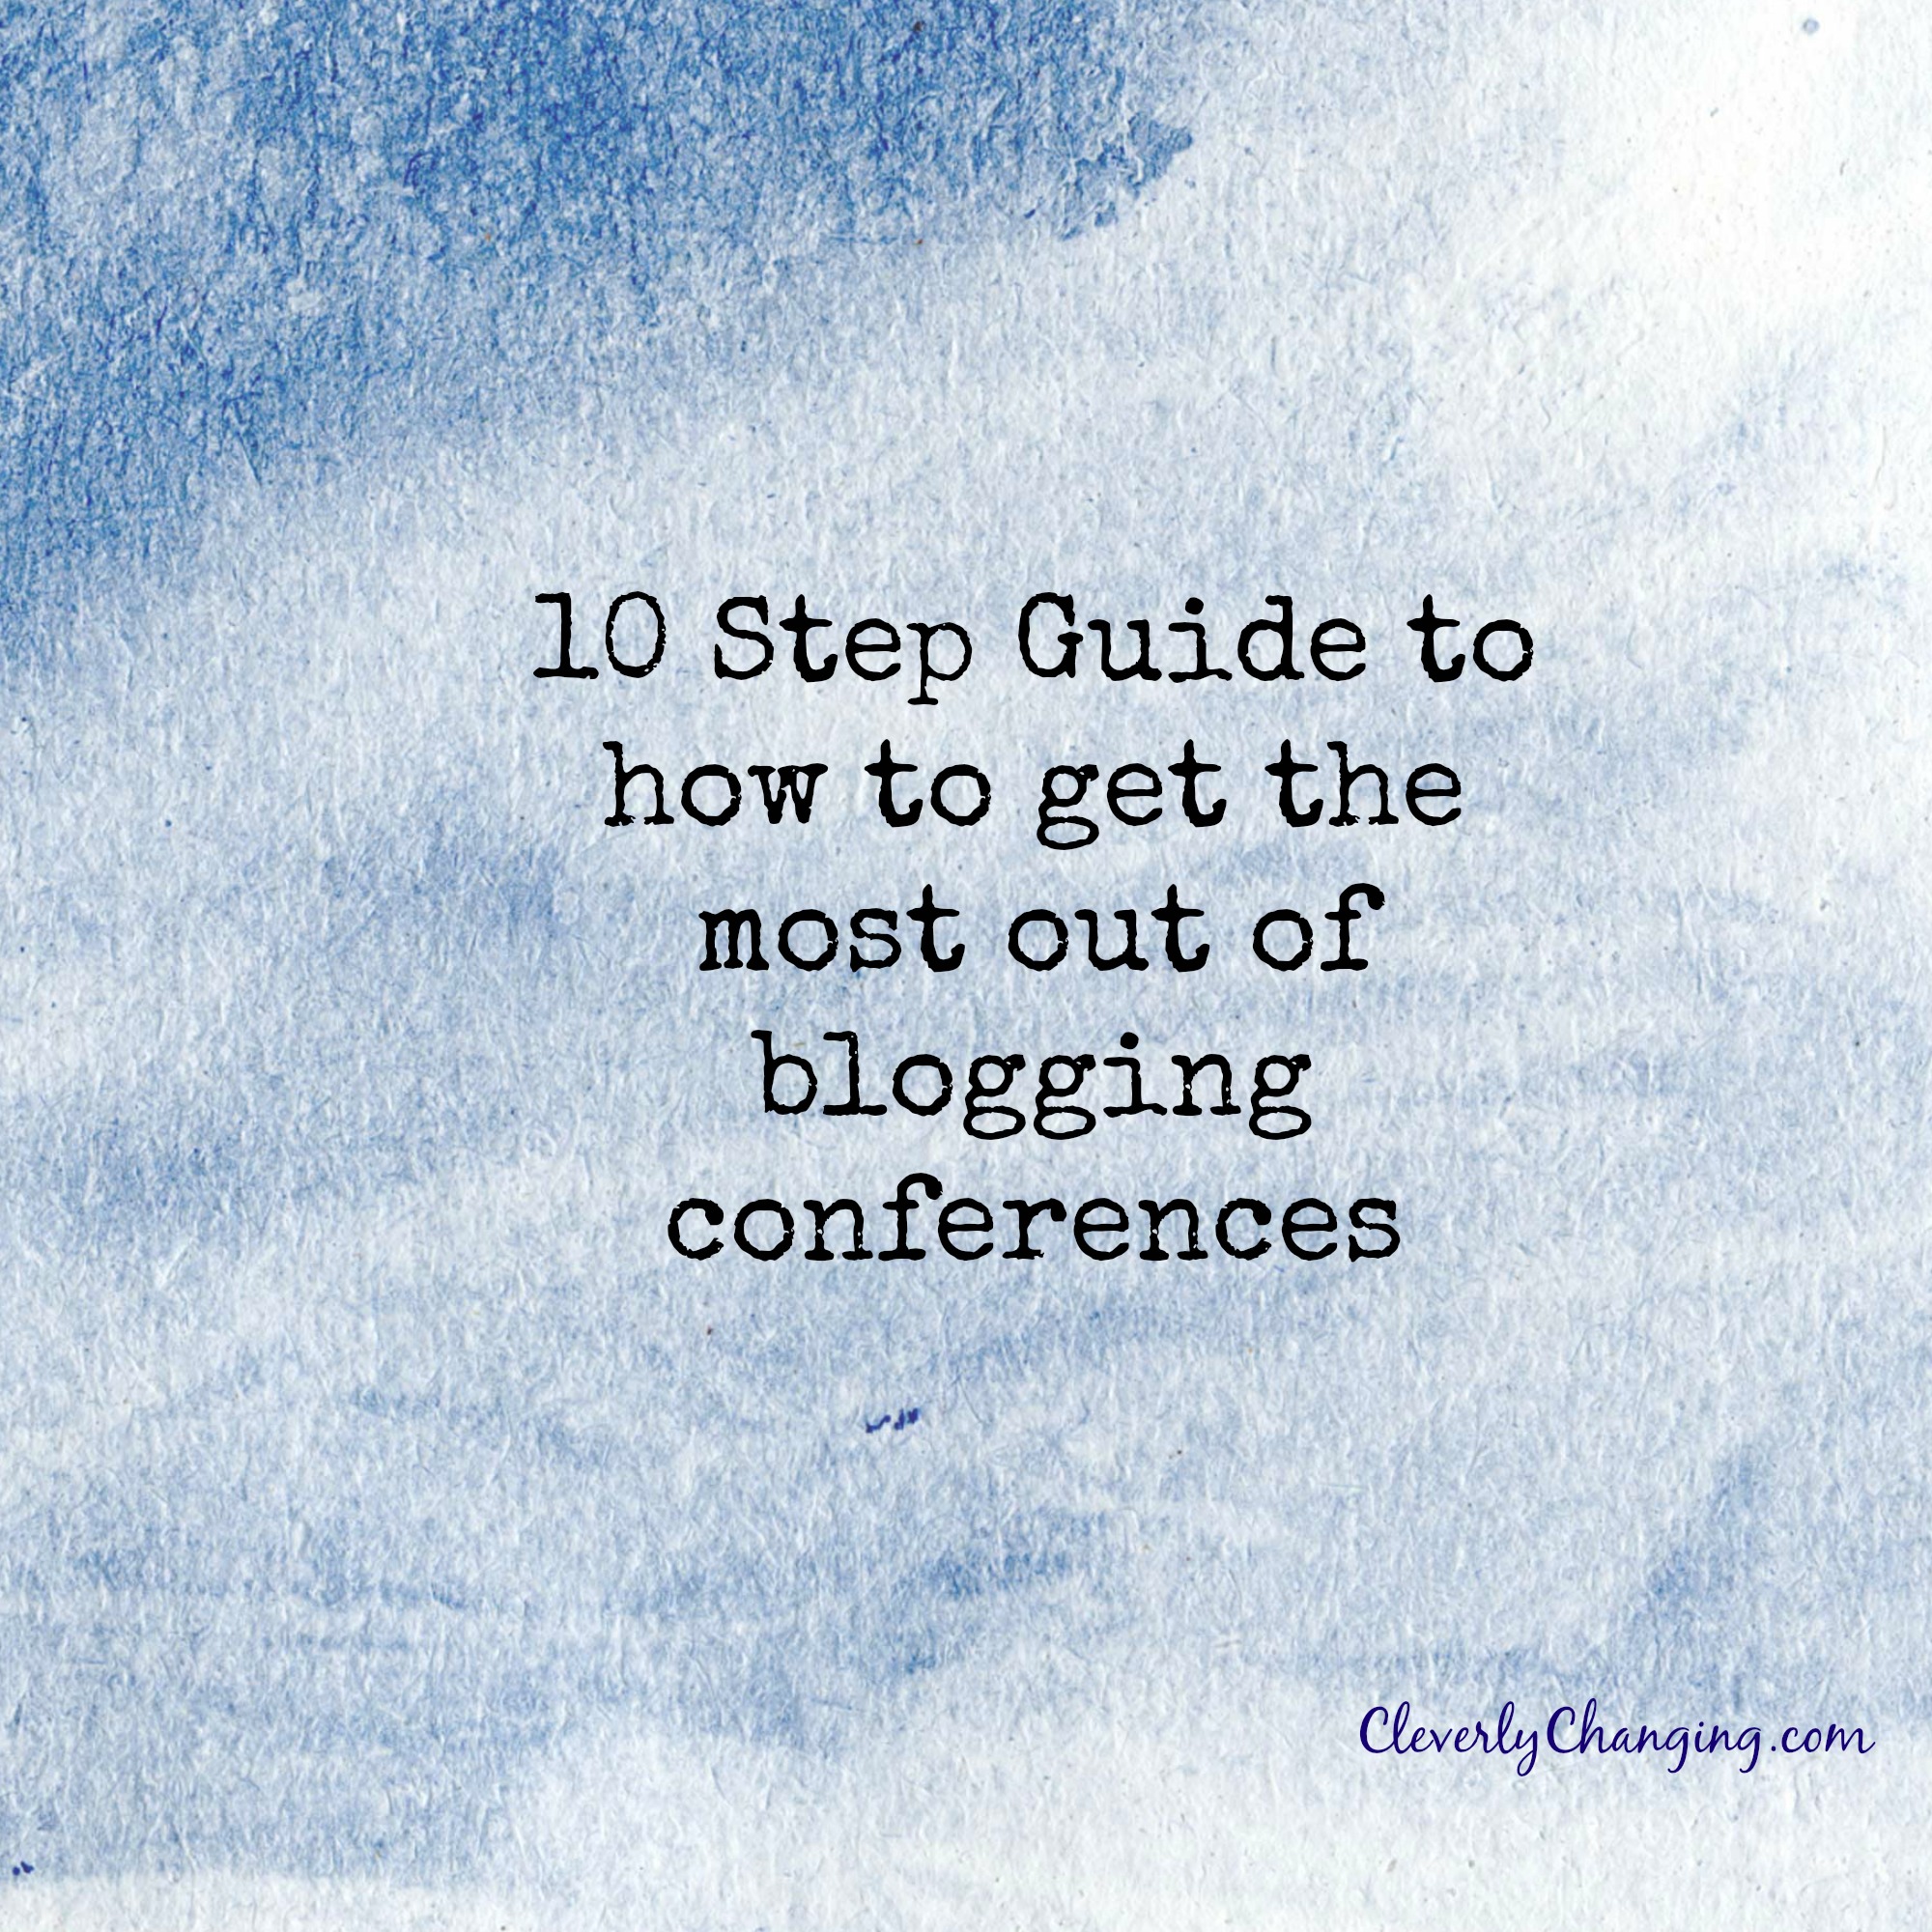 How to get the most out of blogging conferences.